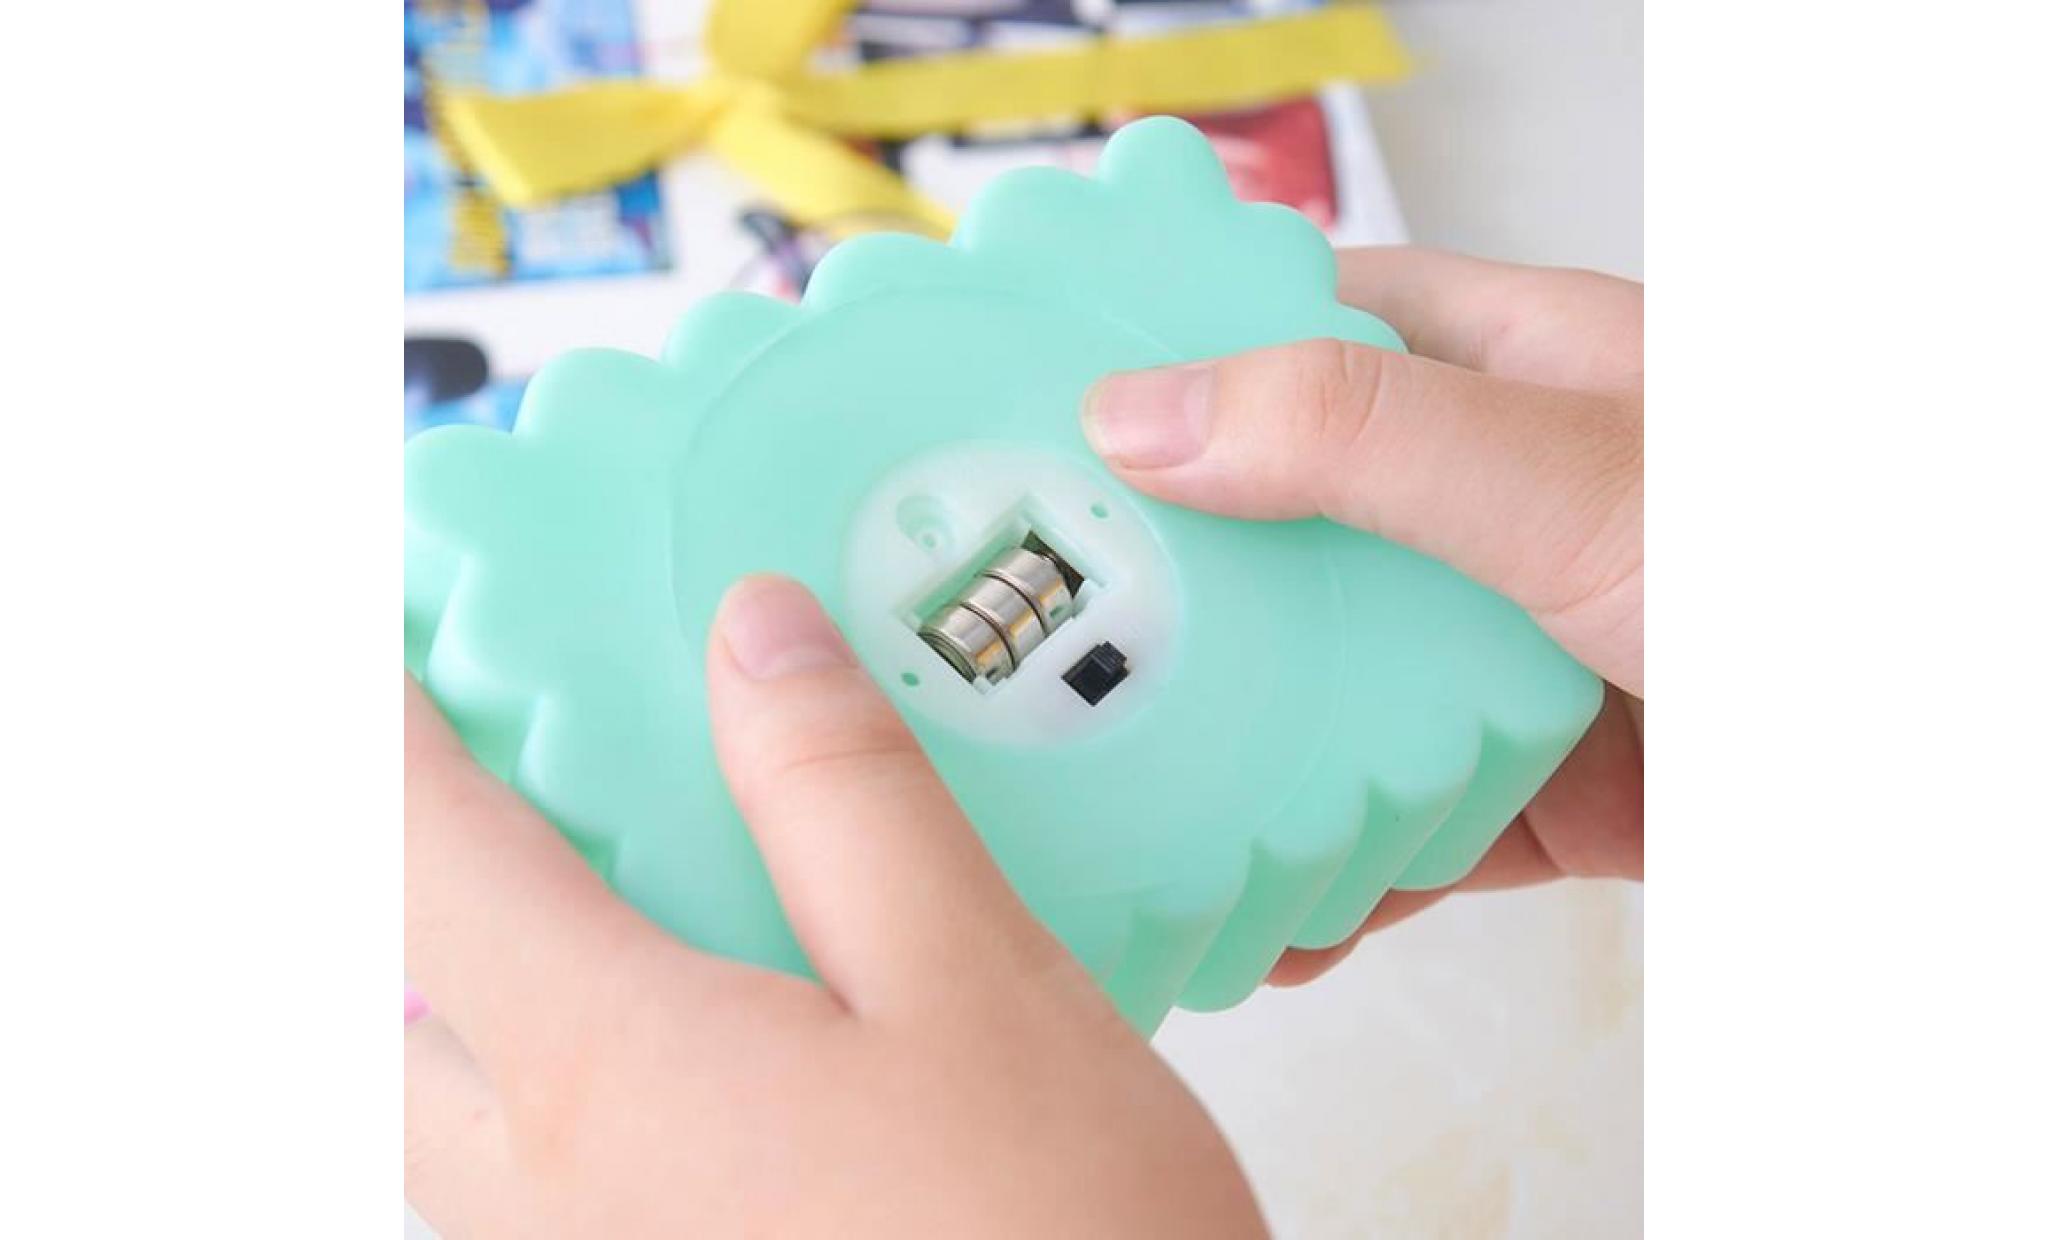 lovely biscuits face night light children bedroom decor mini led lamp bulb green pageare1289 pageare1289